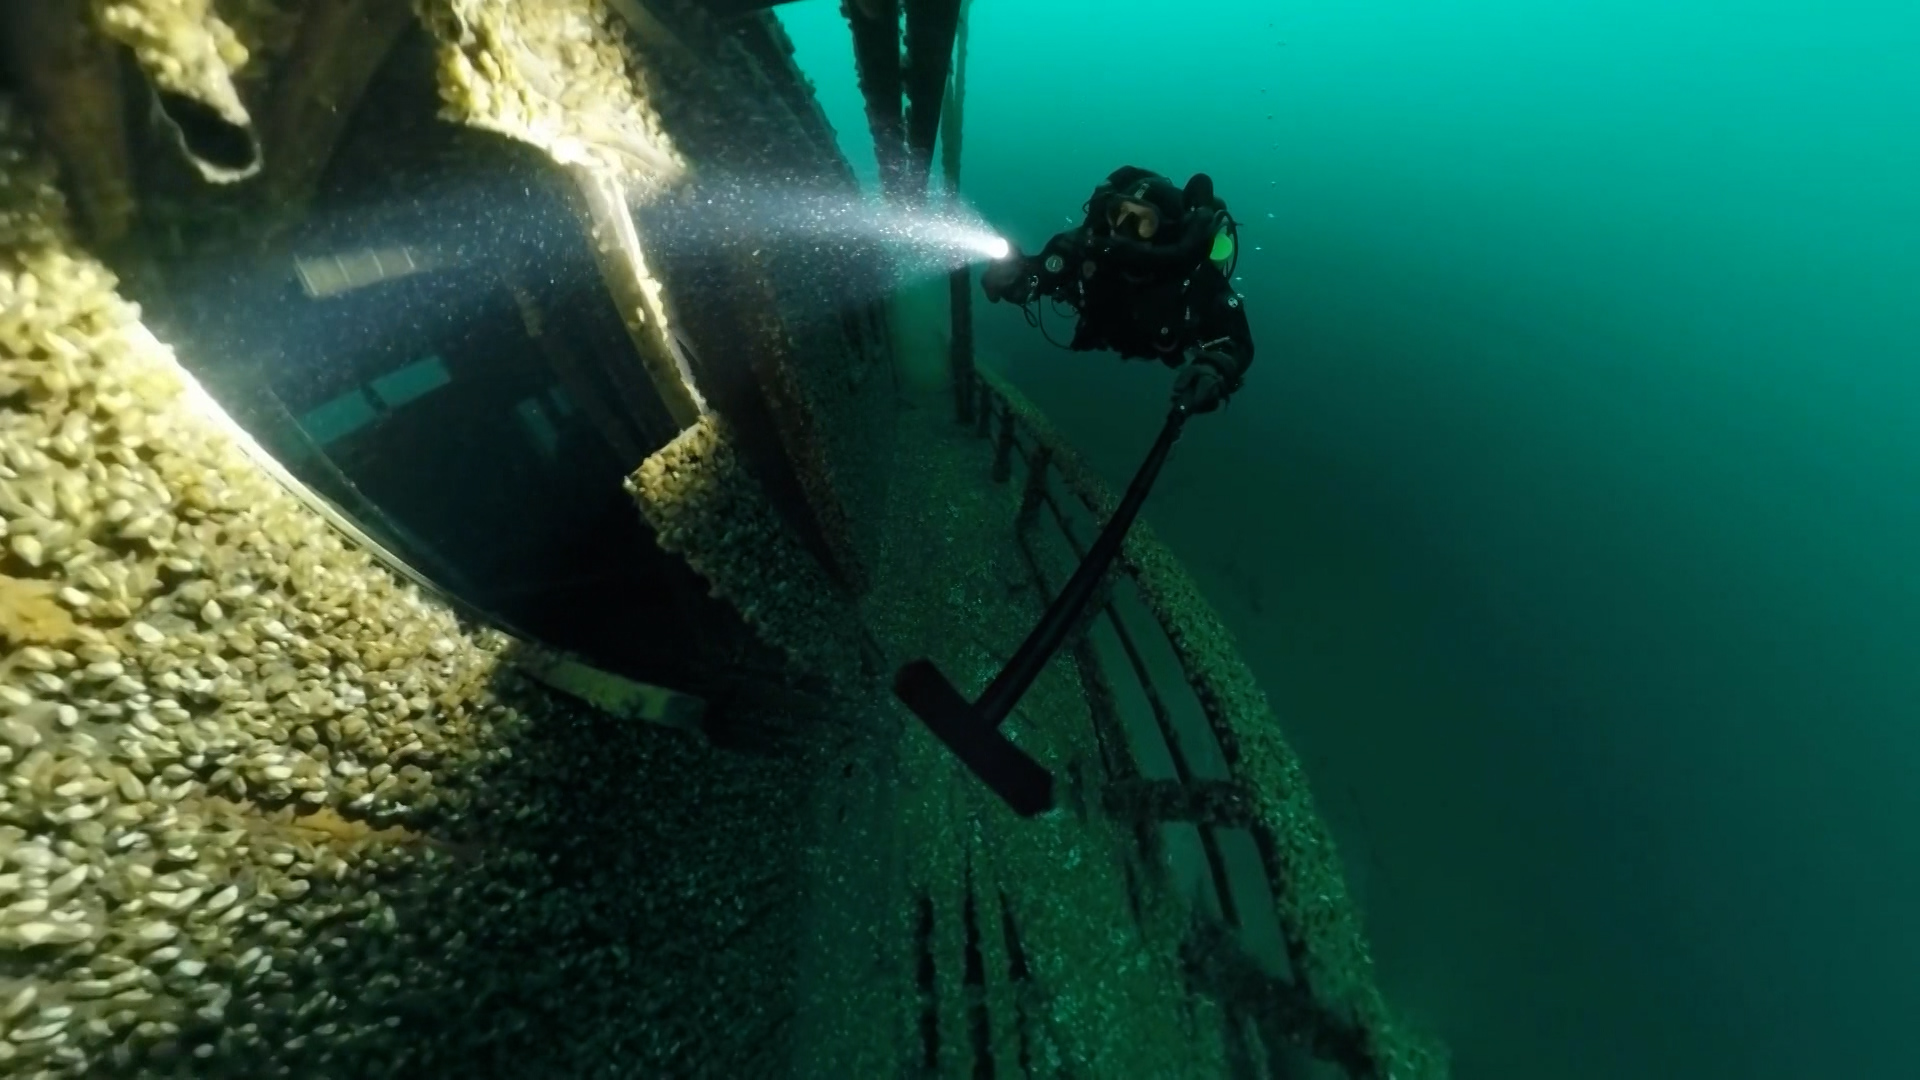 Thunder Bay National Marine Sanctuary Deep Dives Into Propeller Russia Ship Discovery  WBKB 11 [Video]